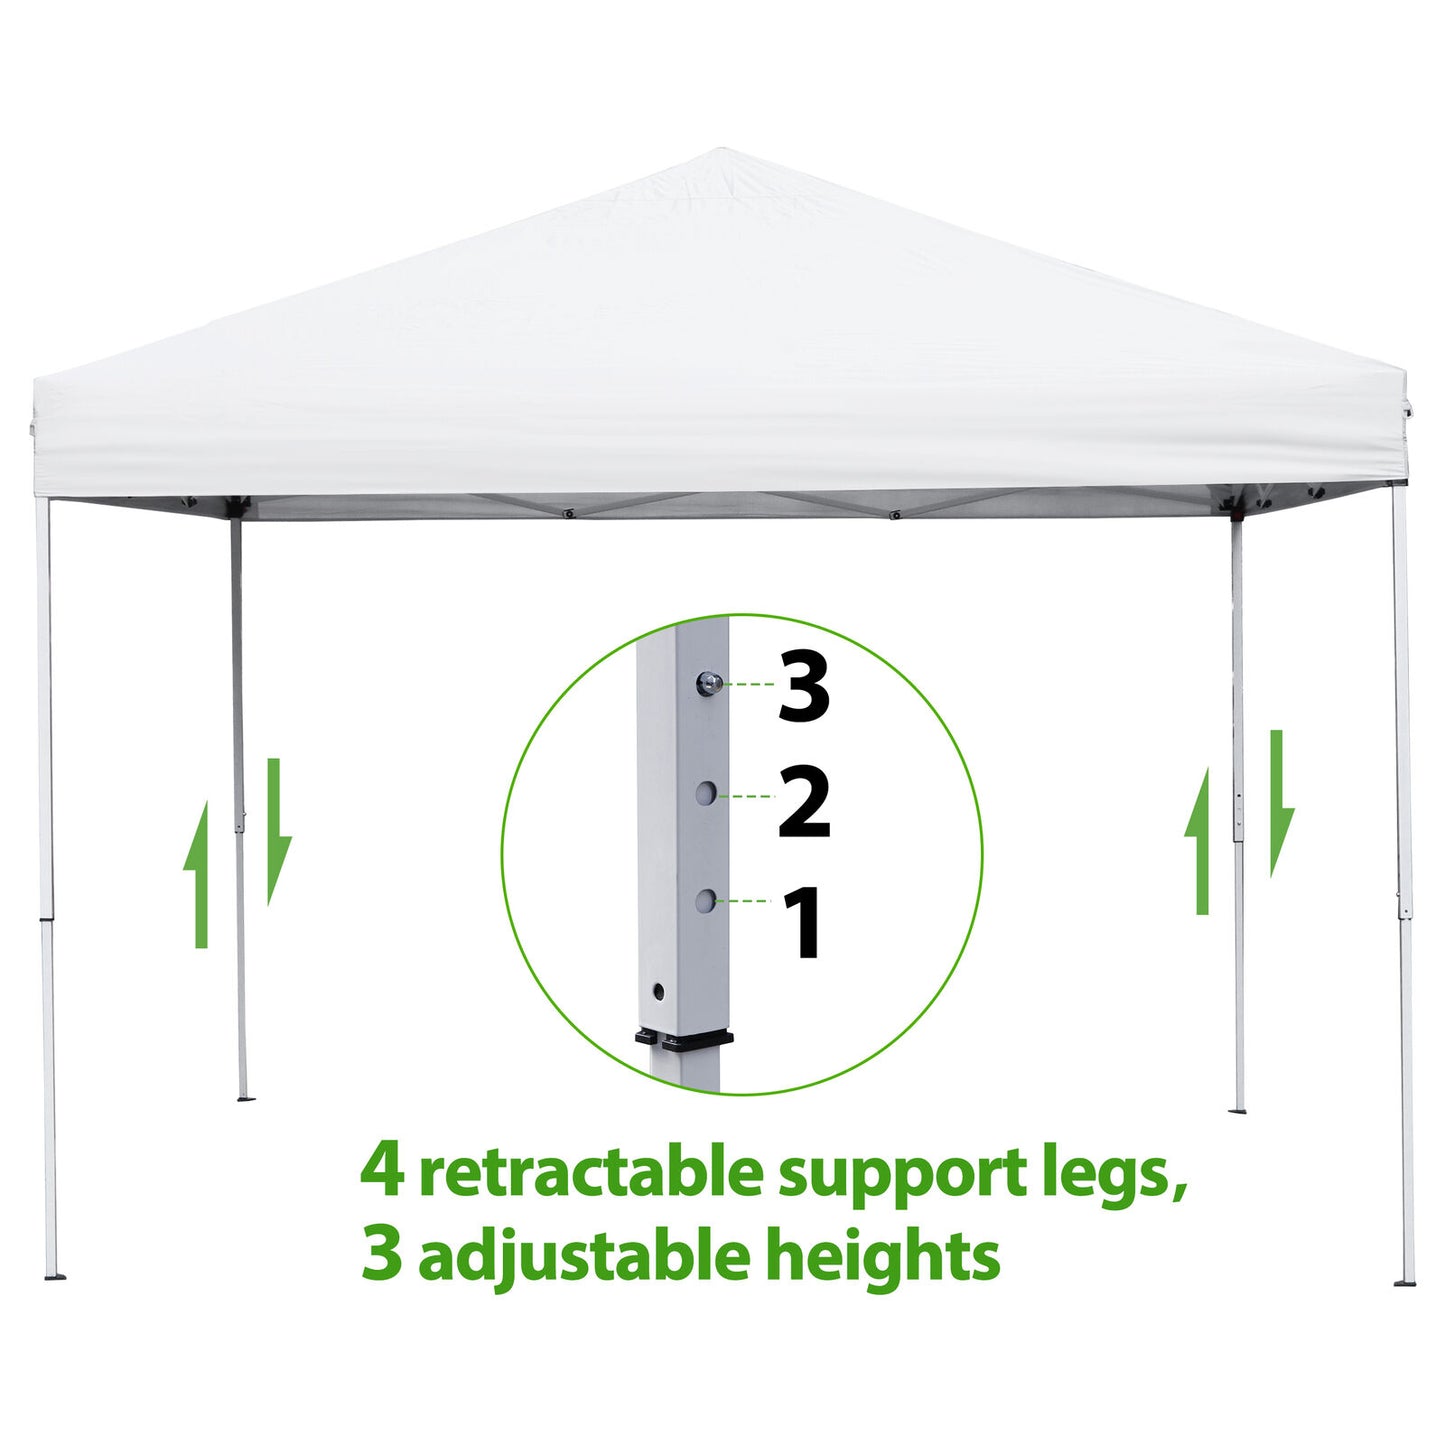 Durable 10x10 FT Pop-Up Foldable Waterproof Canopy Tent Adjustable Heights W/Bag